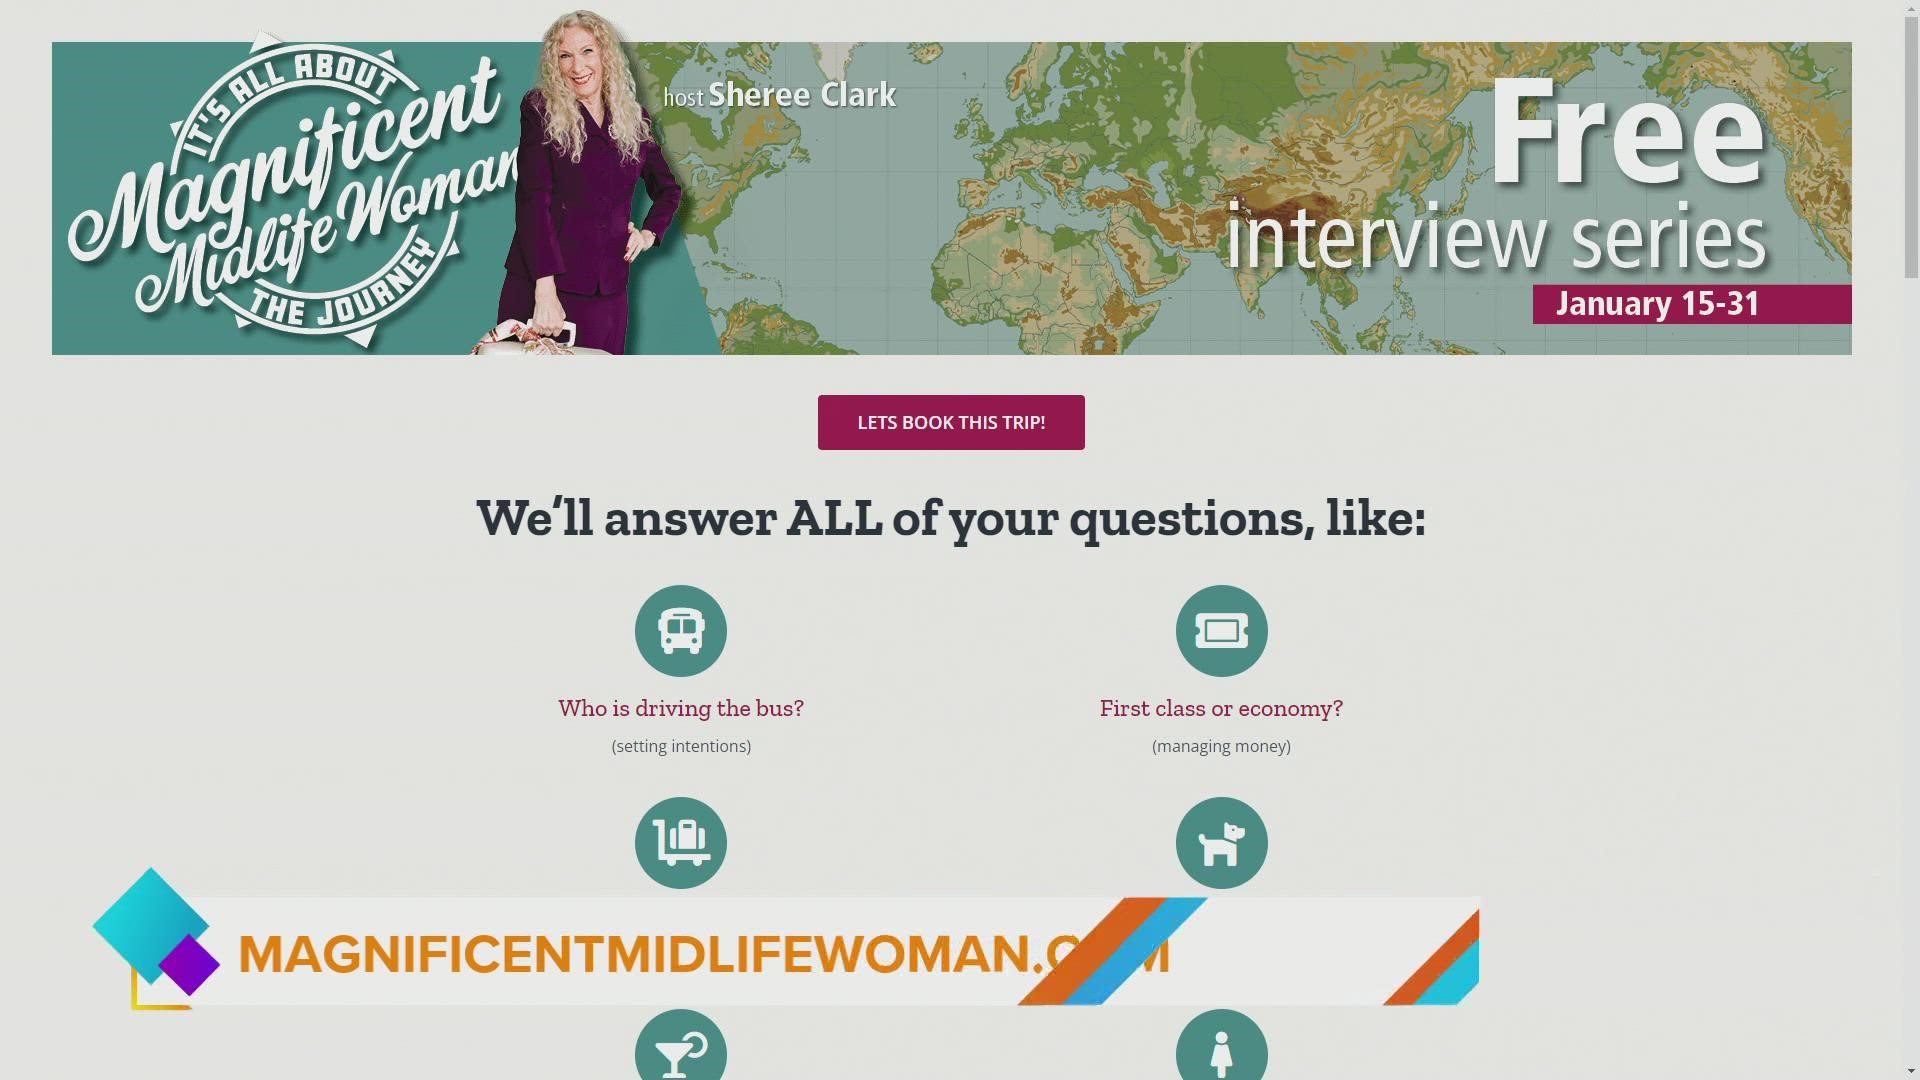 Sheree Clark of Fork in the Road has a helpful tool for self-improvement-It's Her January interview series, The Magnificent Midlife Woman: It's all about the journey